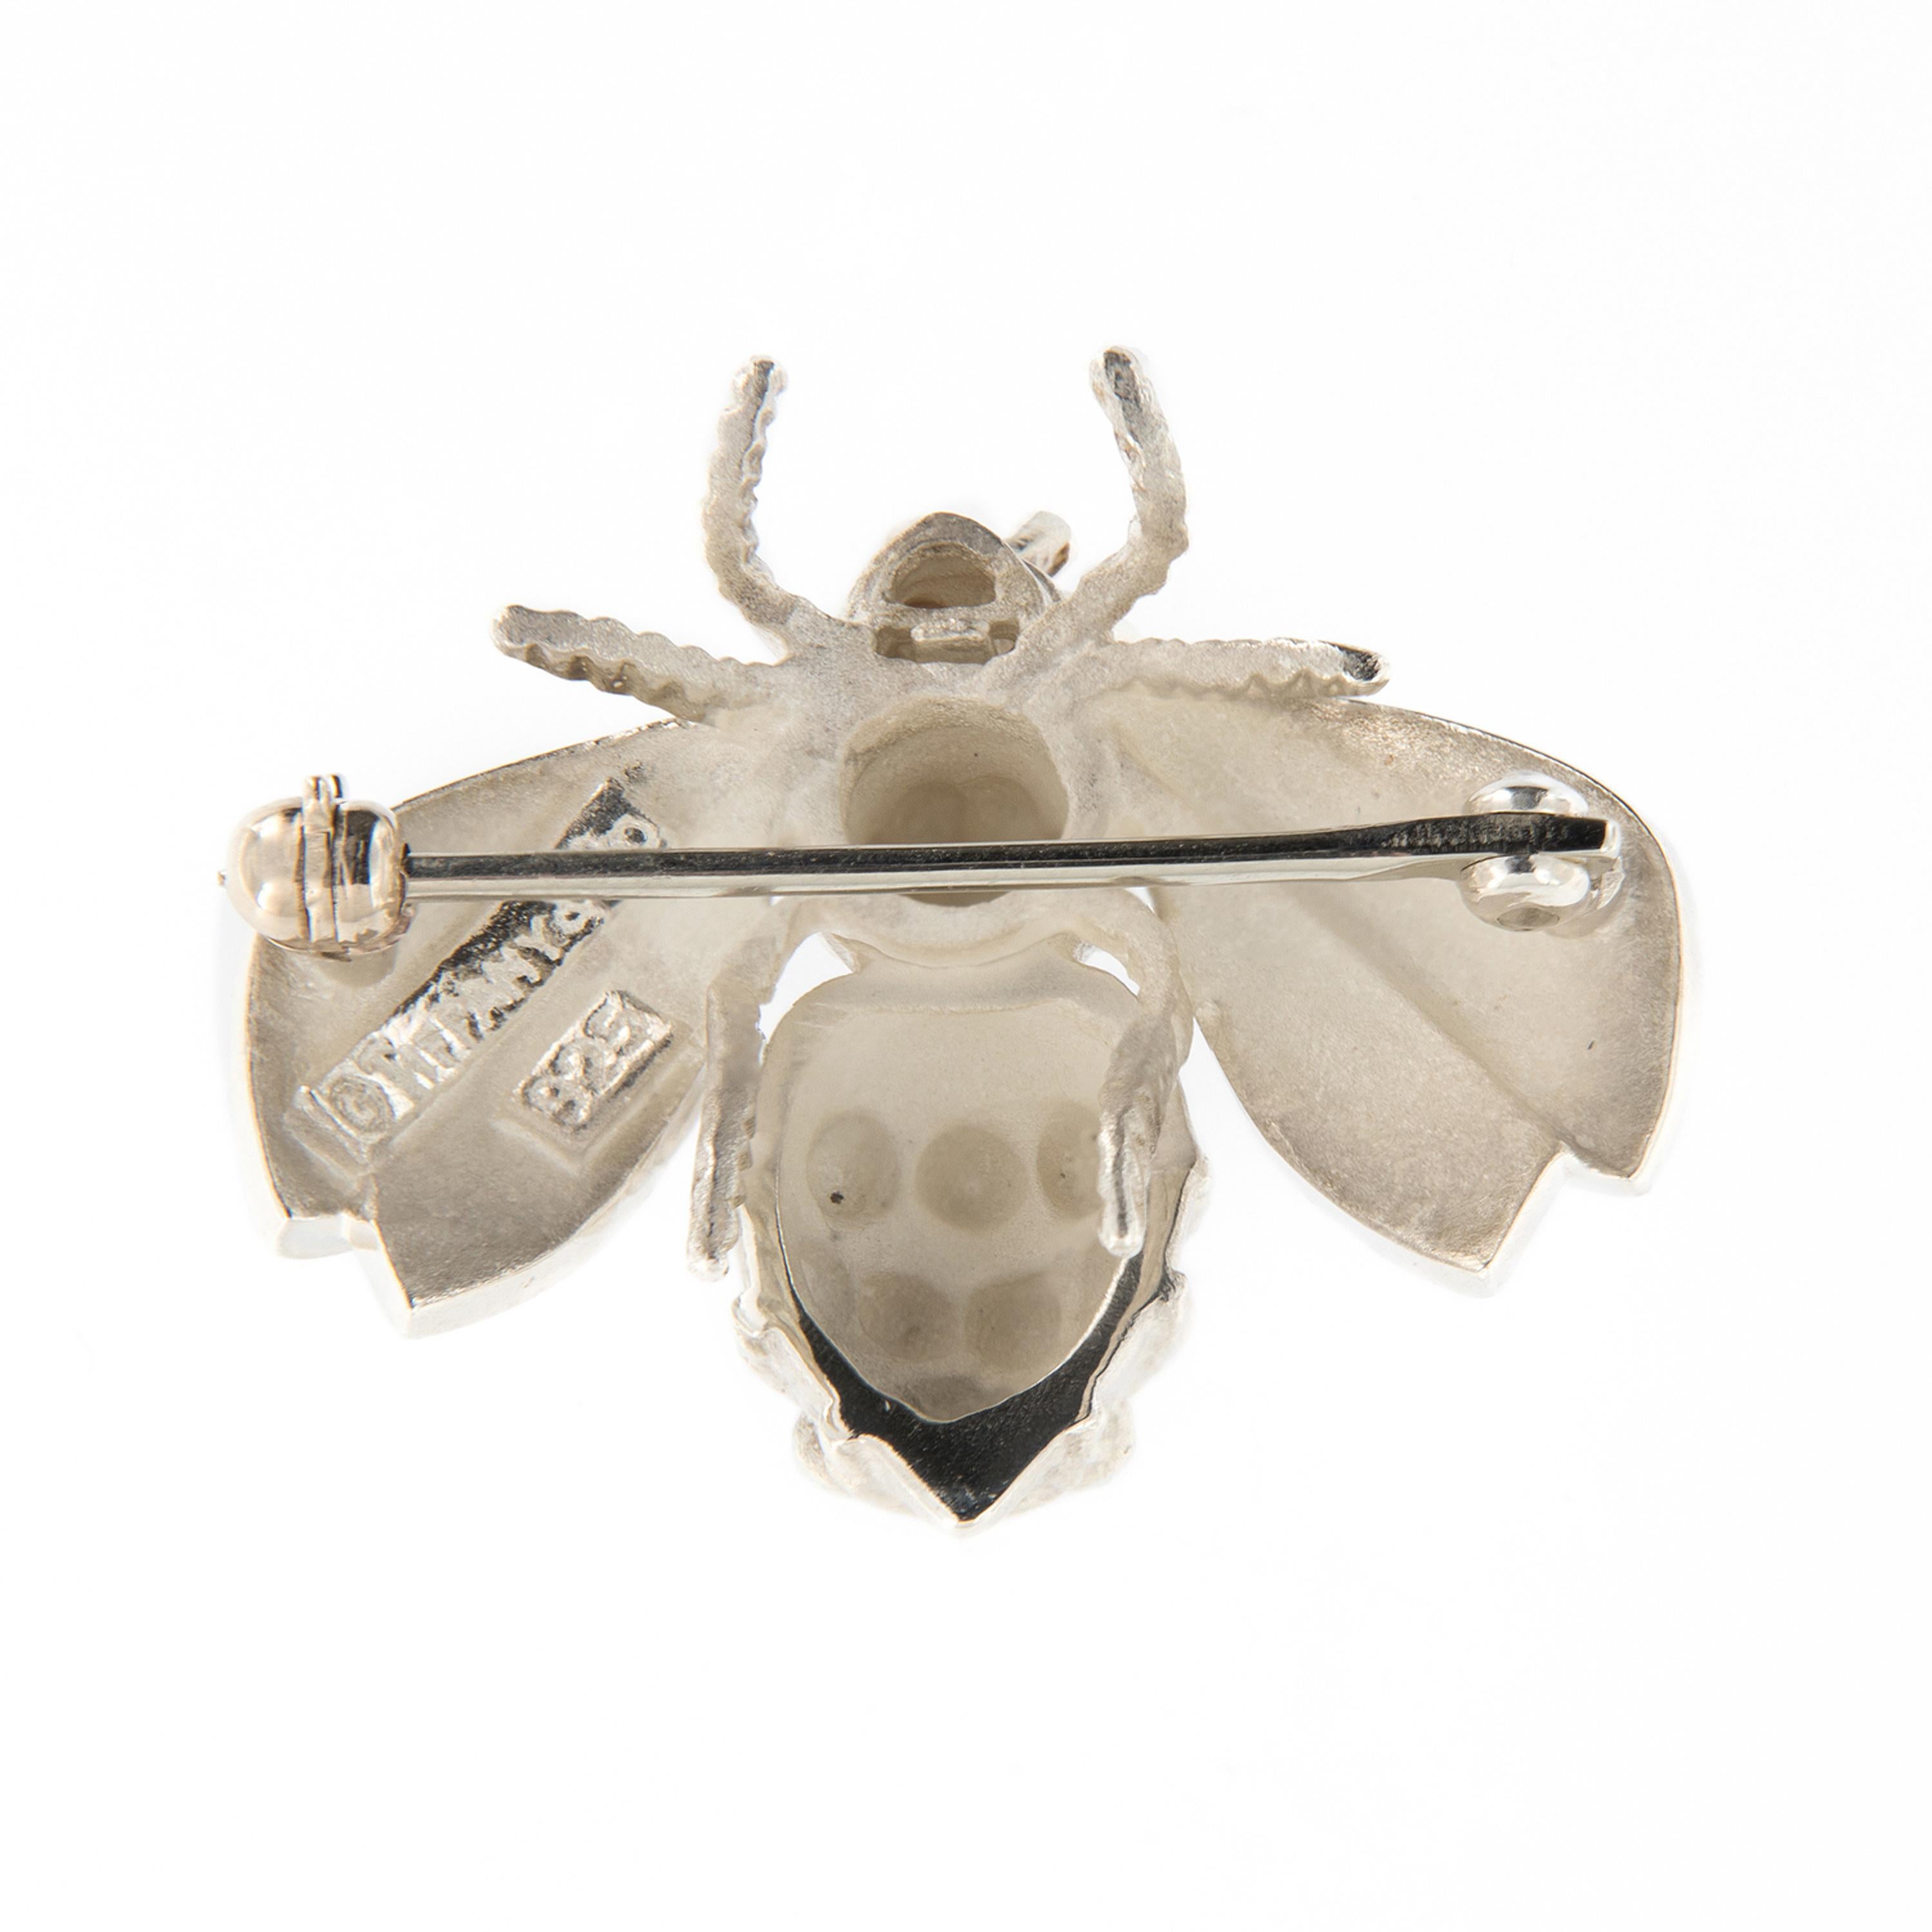 This rare vintage Tiffany pebbled bumble bee is solid sterling silver and has lots of detail. This estate piece is in excellent condition.
Weighs 5.4 grams. Marked Tiffany.